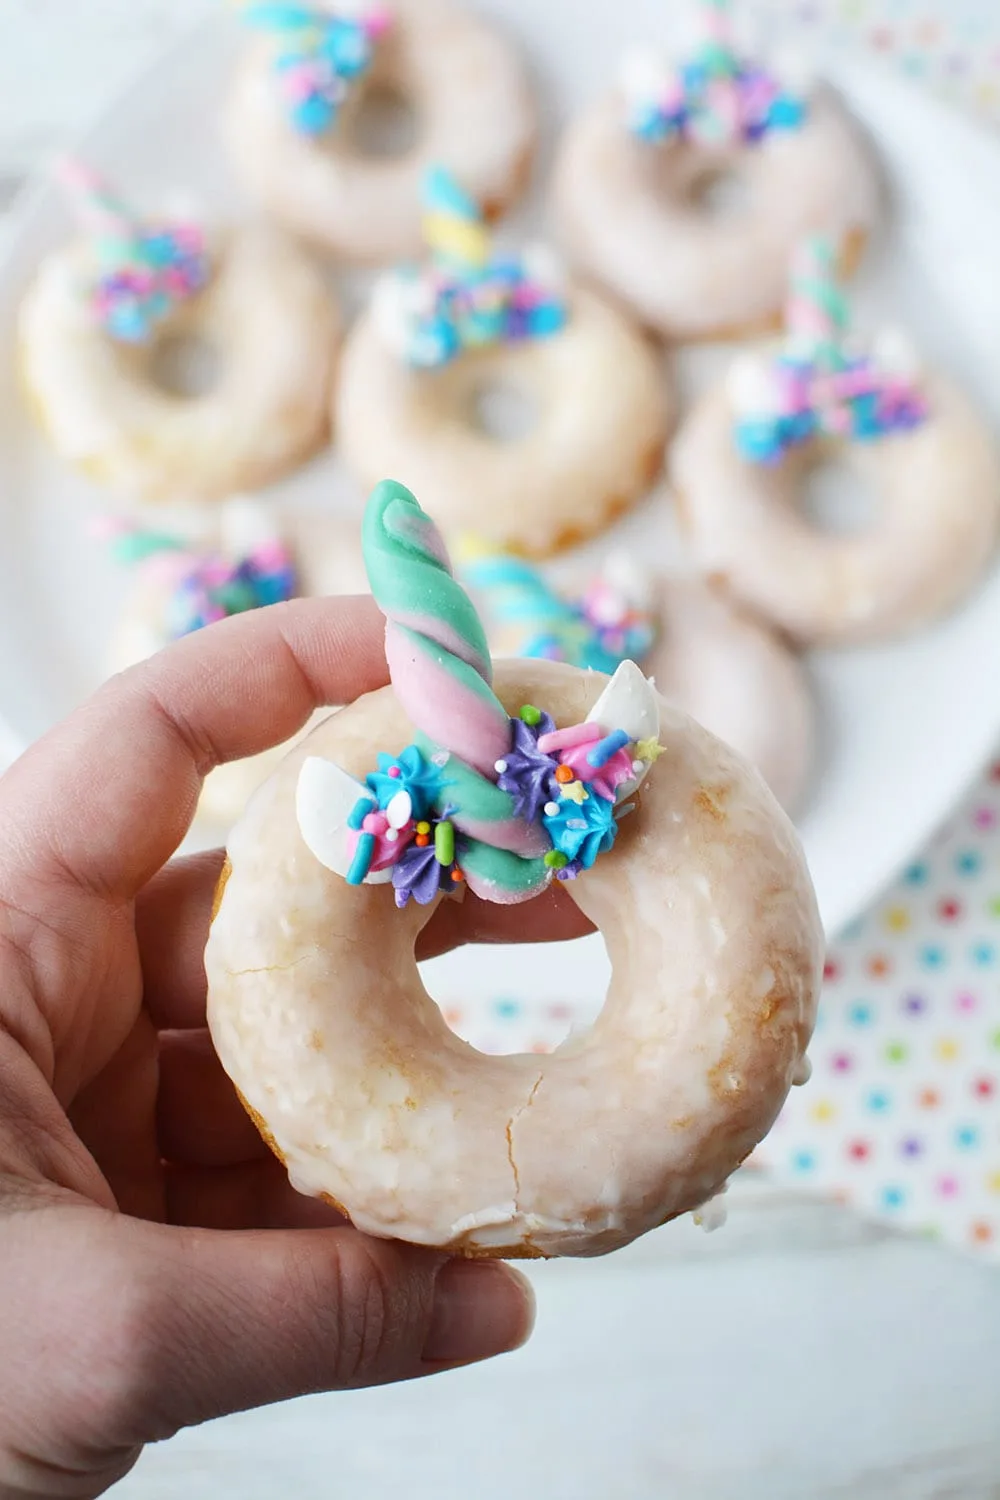 Holding up a unicorn donut with full plate in the background.